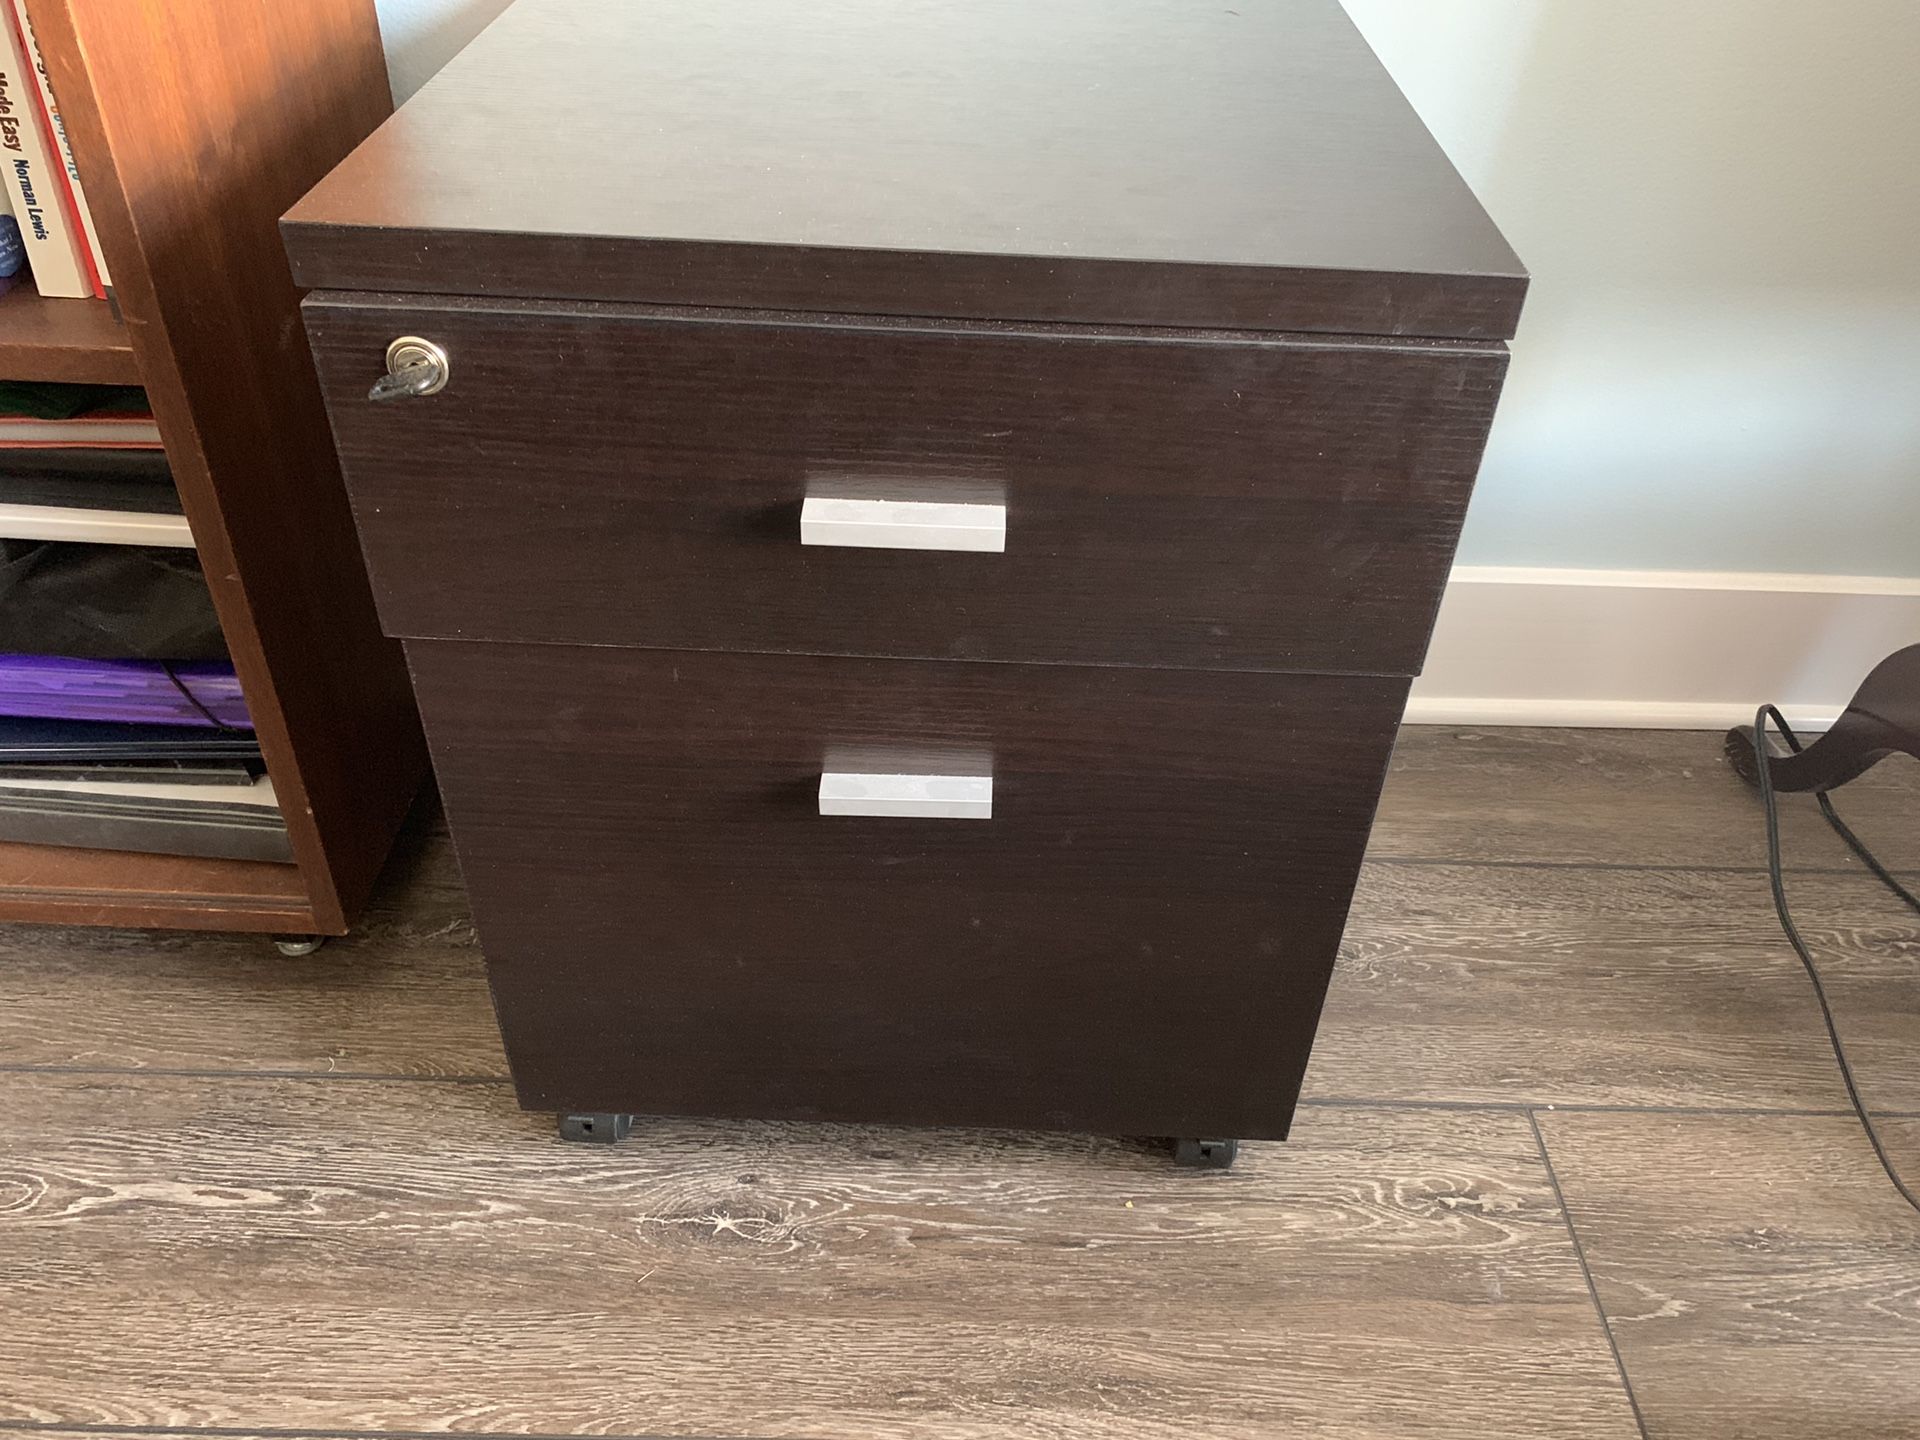 Small rolling file cabinet